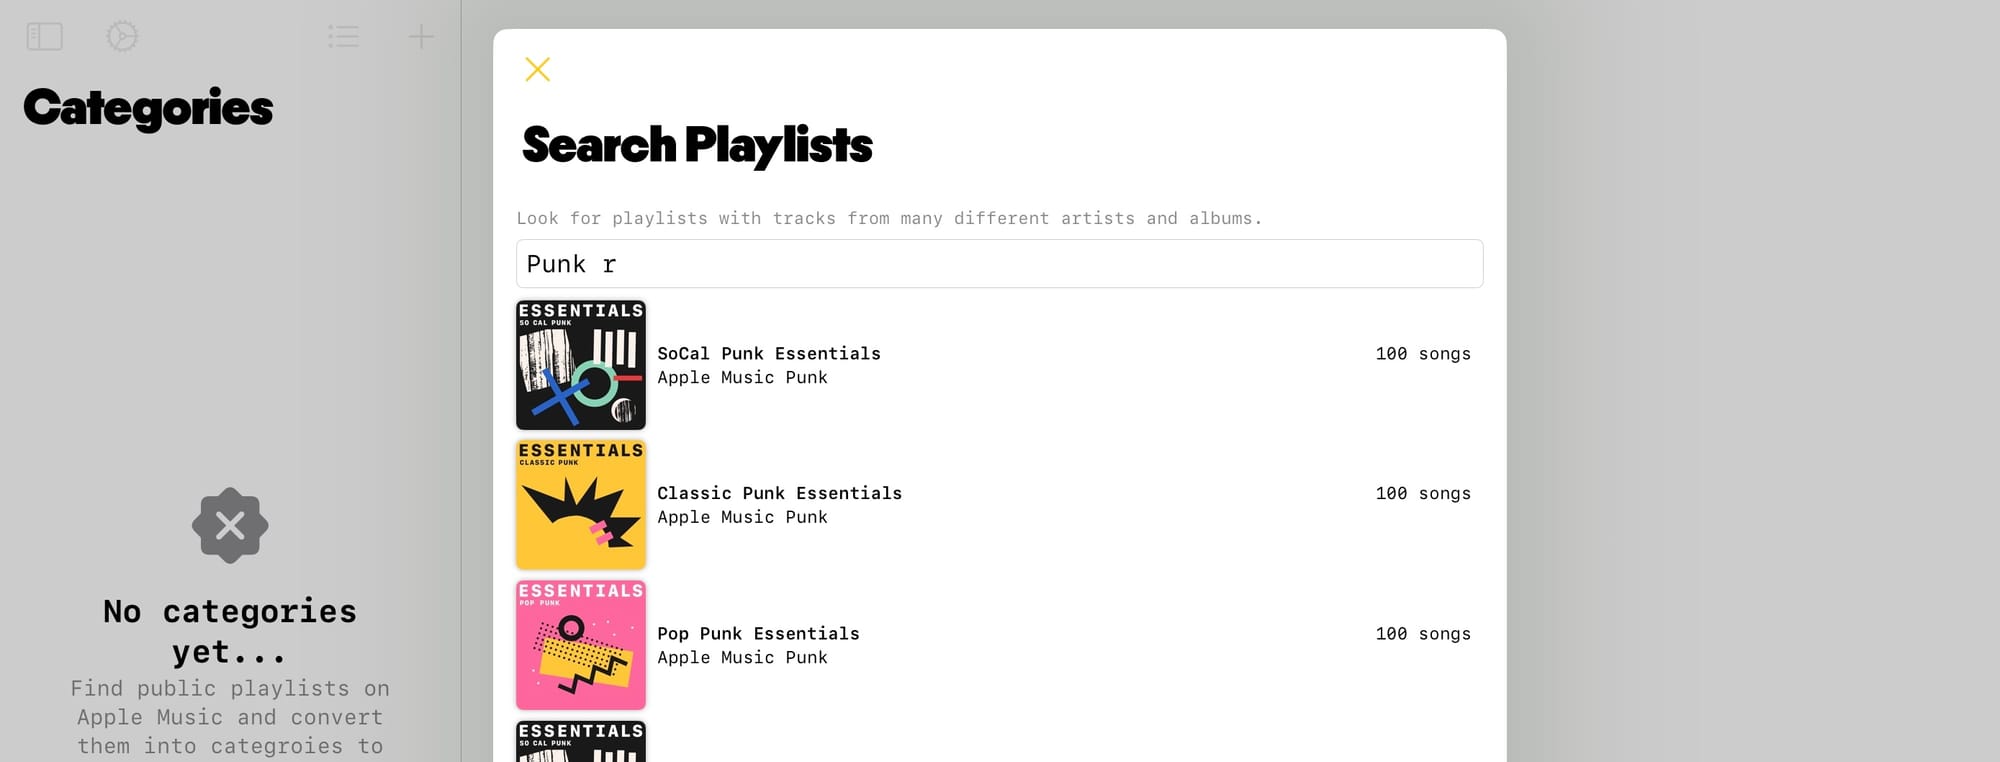 A screenshot of Under Cover showing a sheet with a textfield where the text “punk r” has been entered. Below is a list of punk playlists from Apple Music.